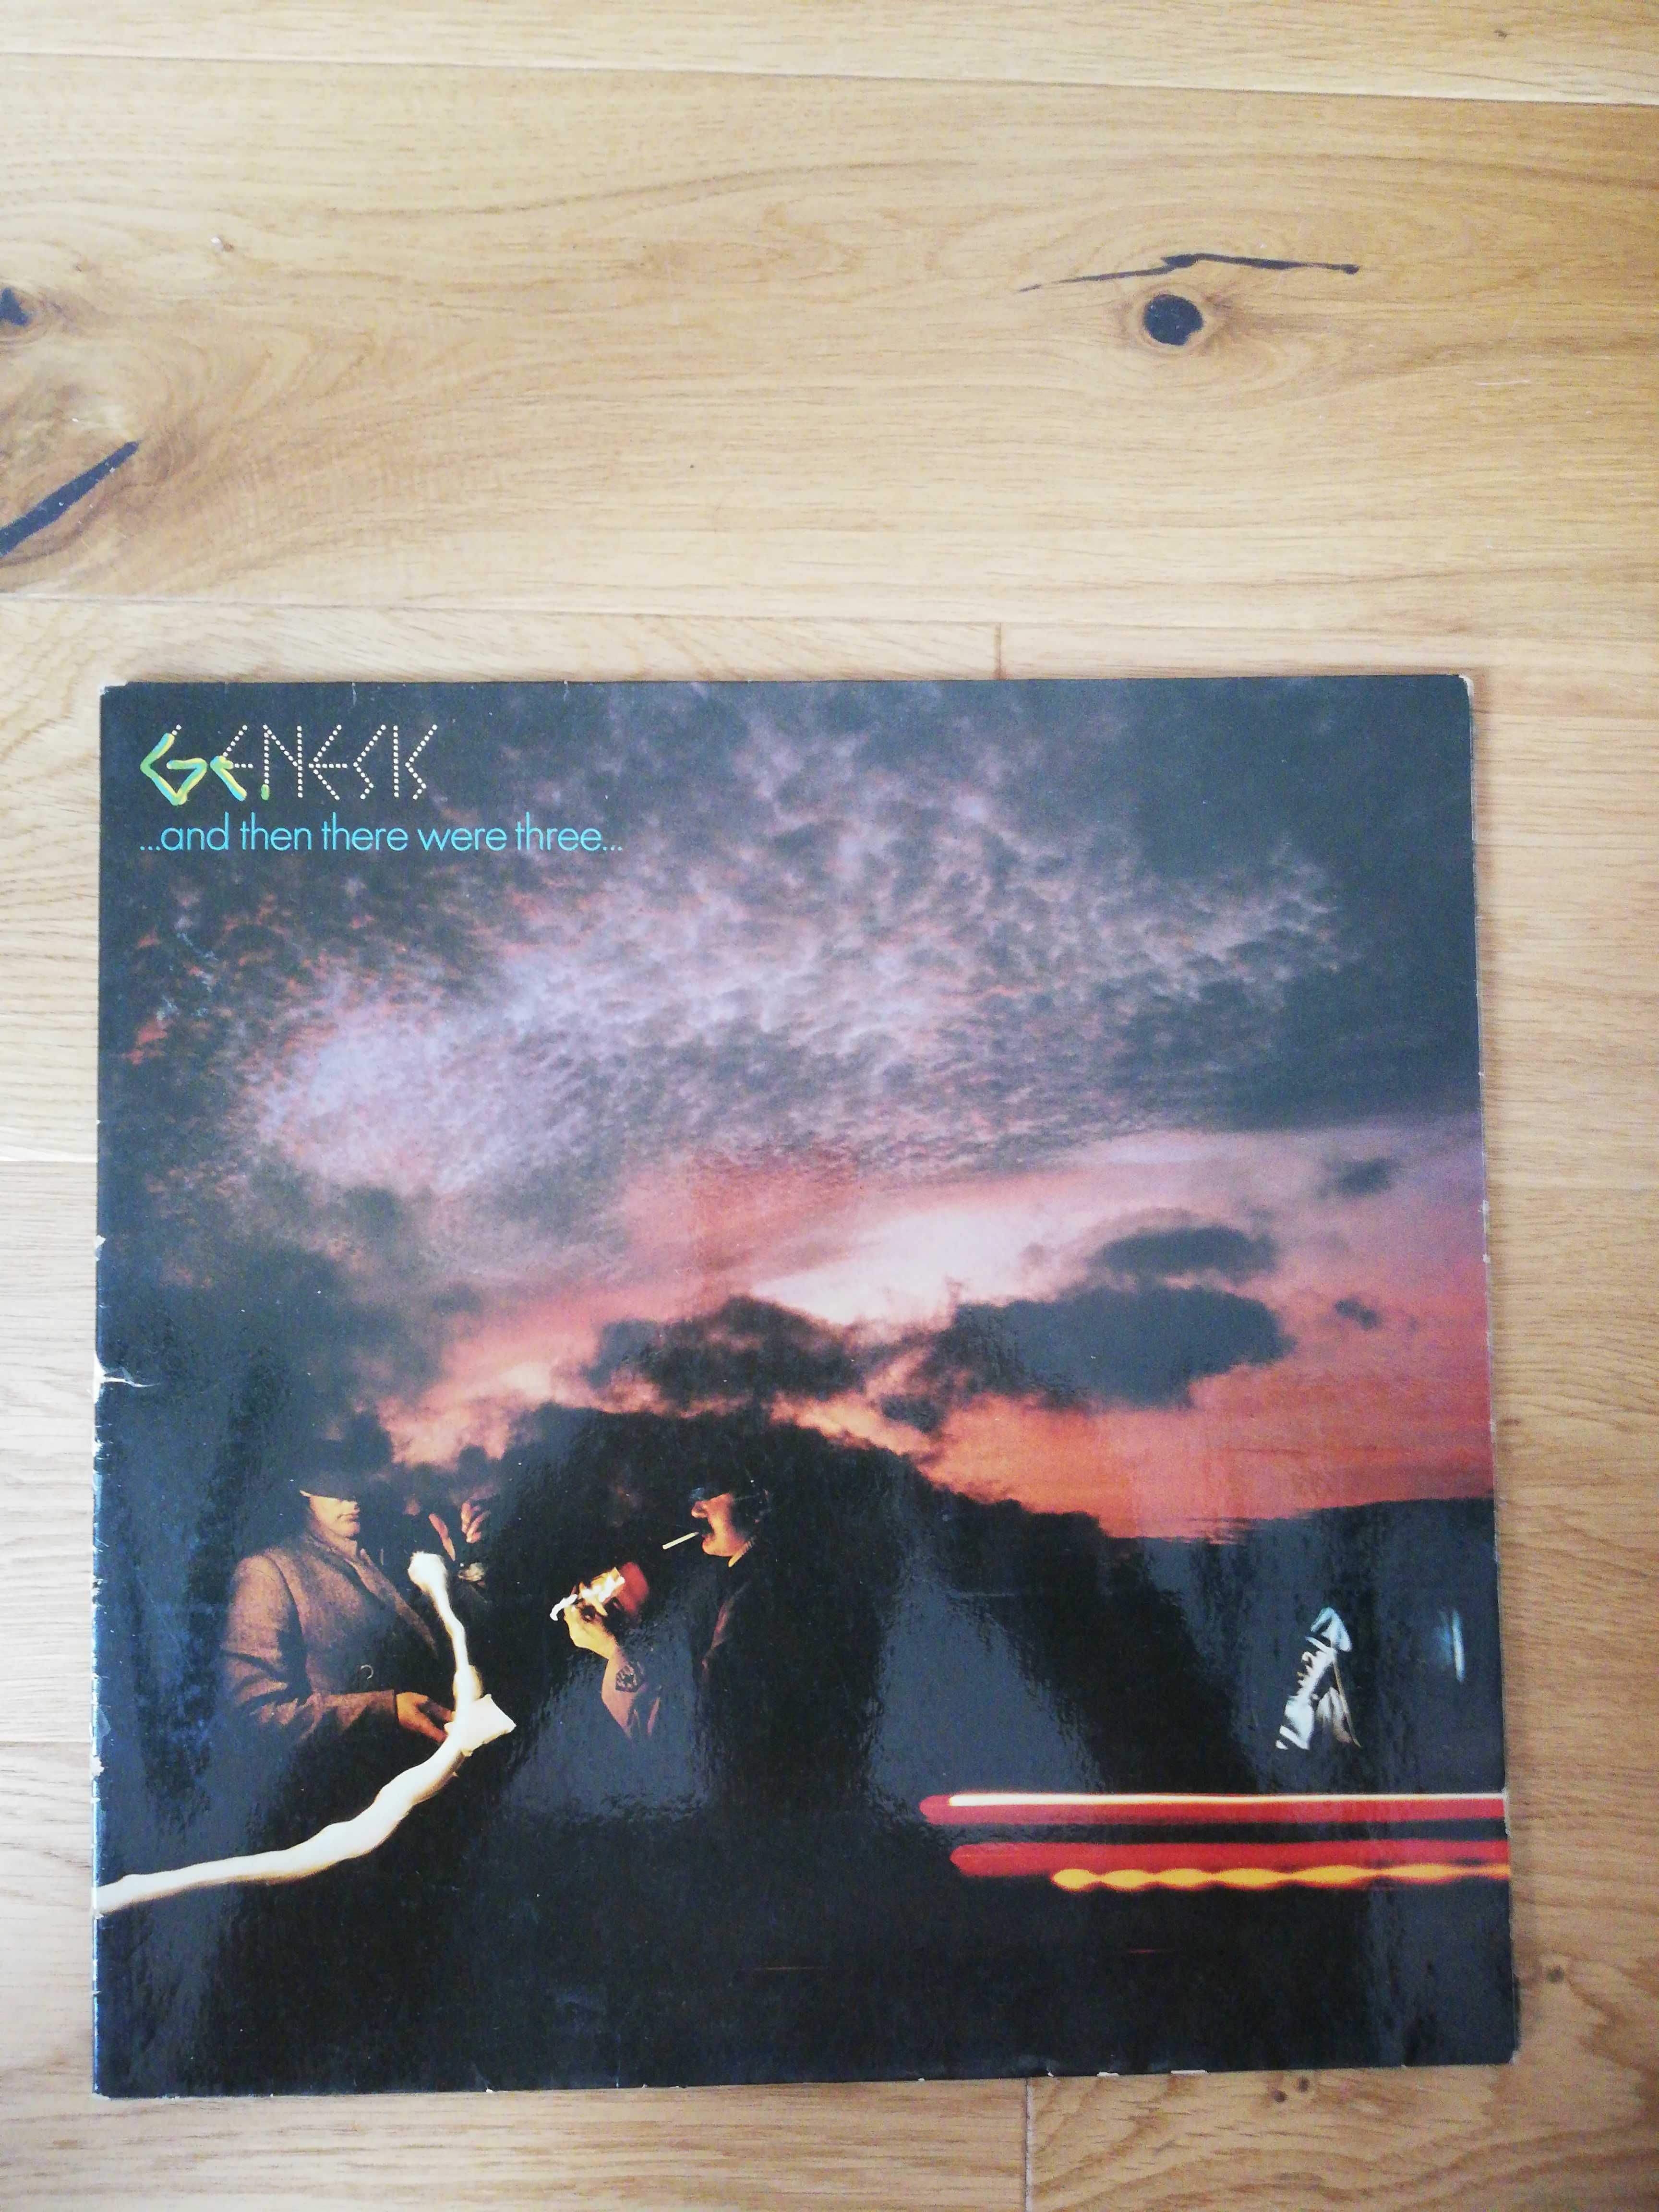 Genesis ...and then there were three LP